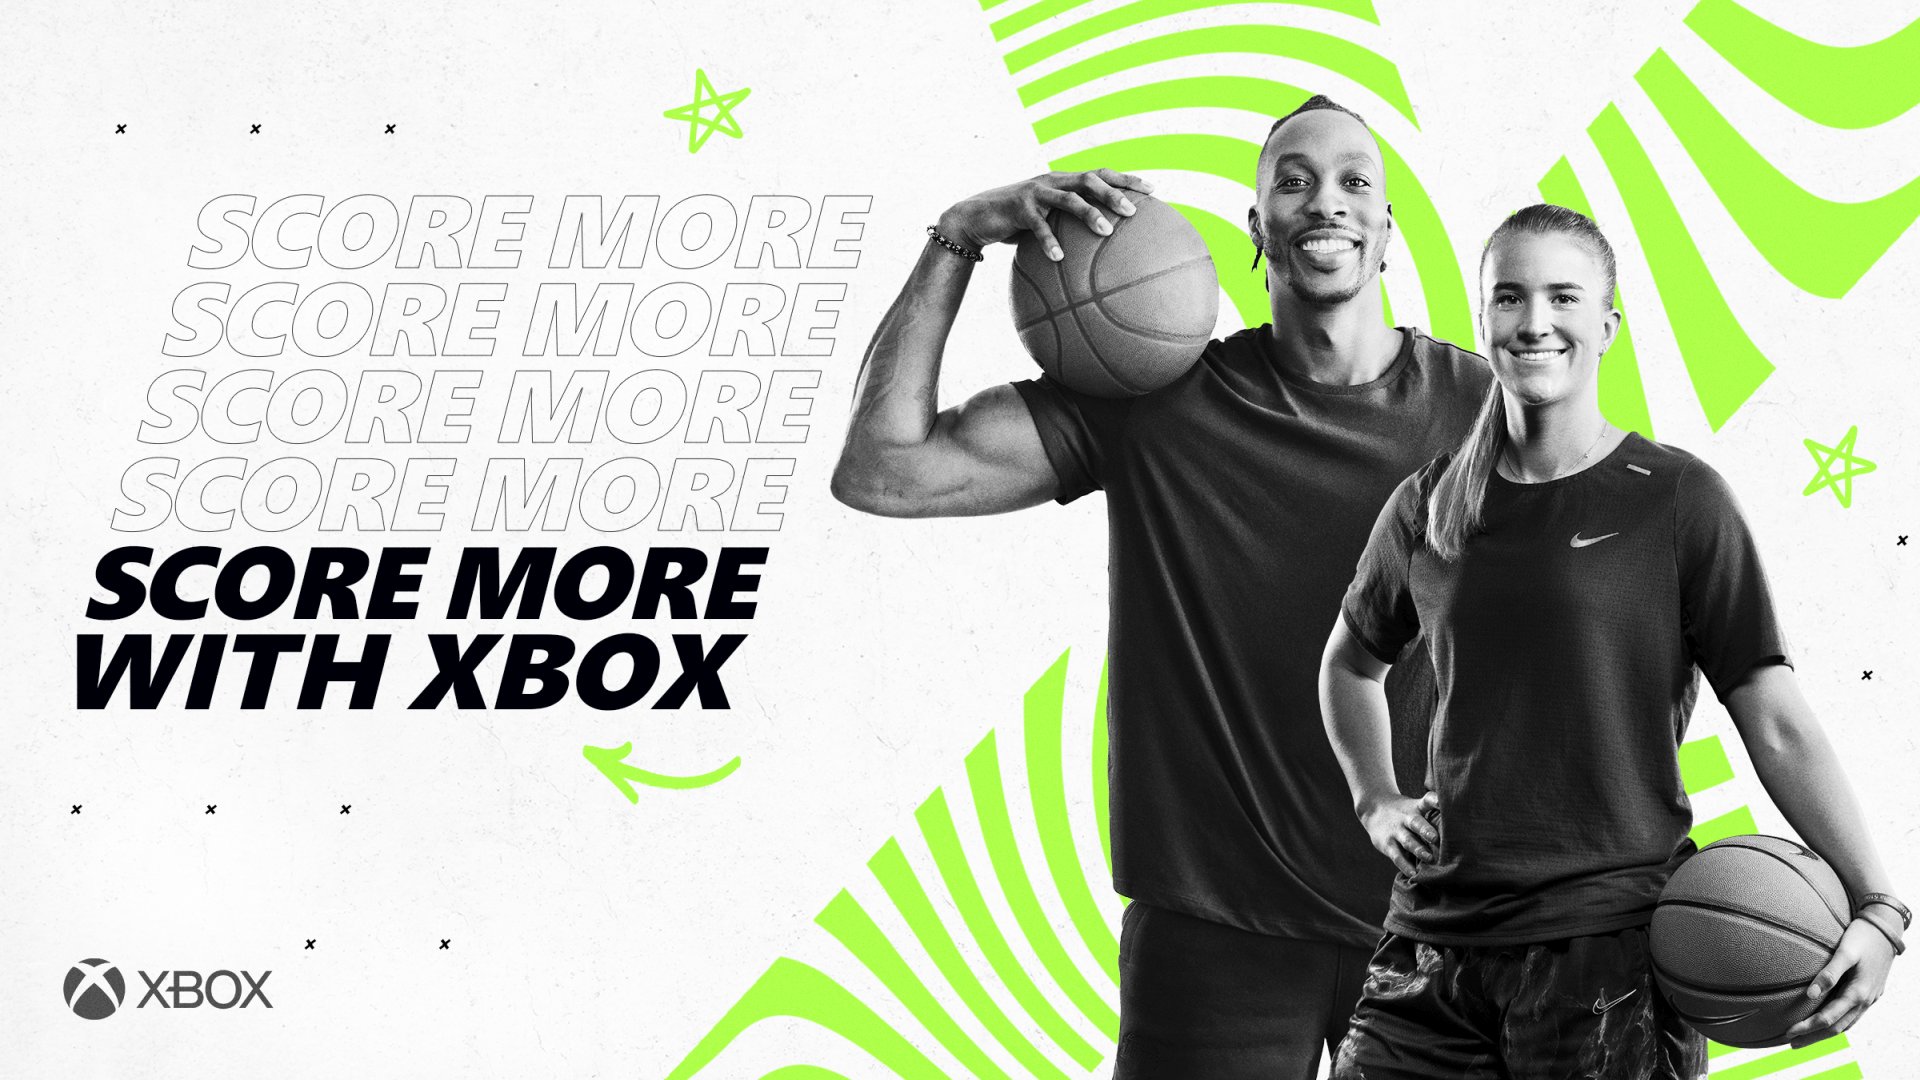 Video For Score More with Xbox to Earn Rewards, Prizes and More